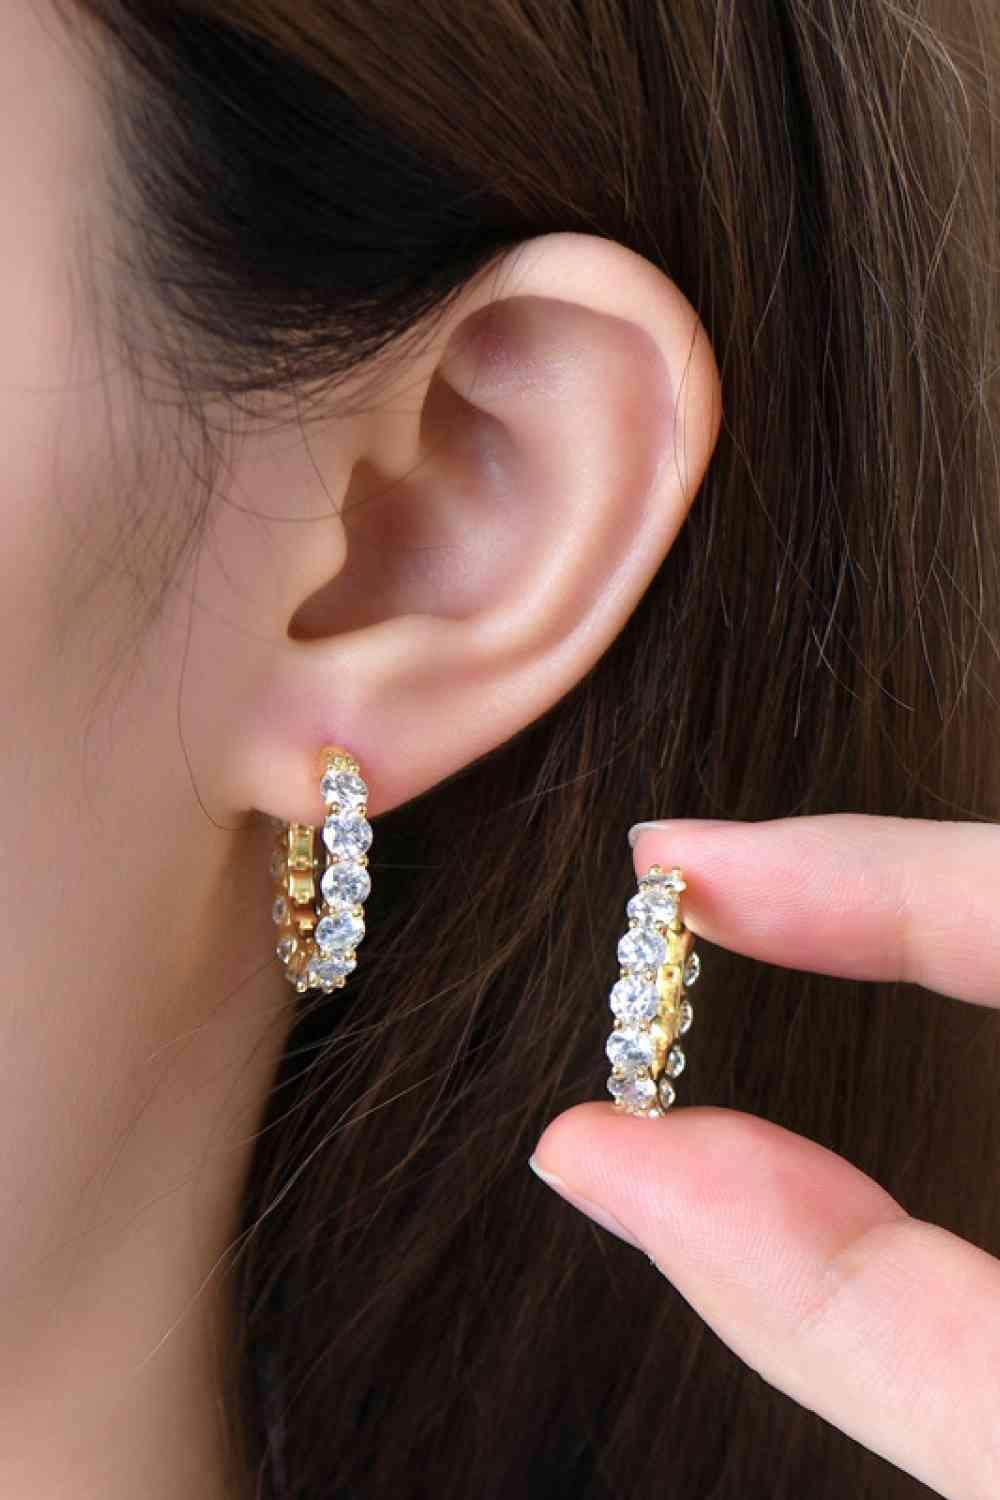 a woman's hand holding a pair of earrings